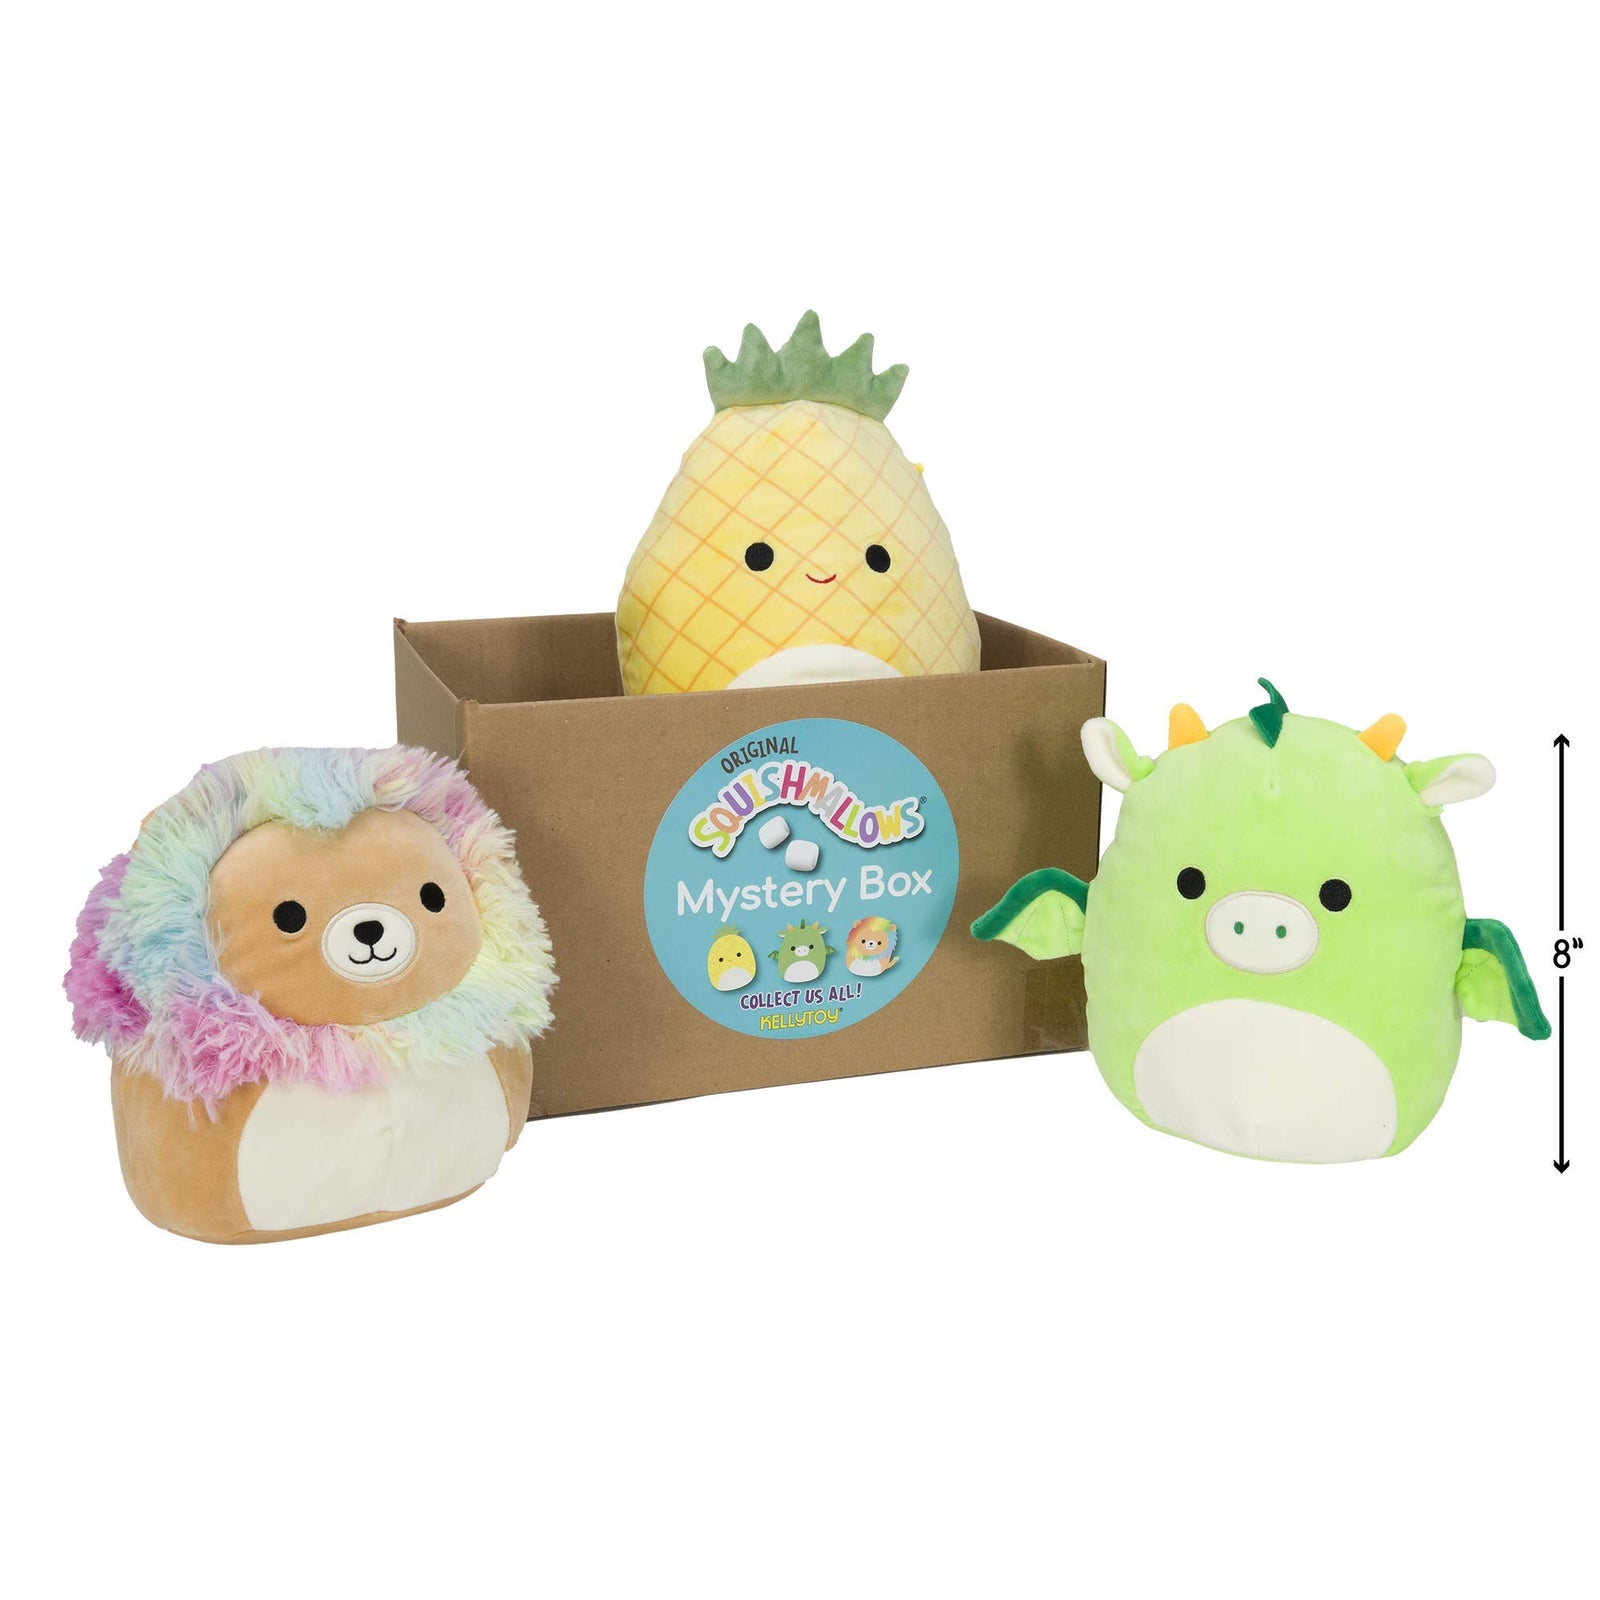 Squishmallows Official Kellytoy Plush 8" Plush Mystery Box Three Pack - Styles Will Vary in Surprise 8" Plush Box That Includes Three 8" Plush